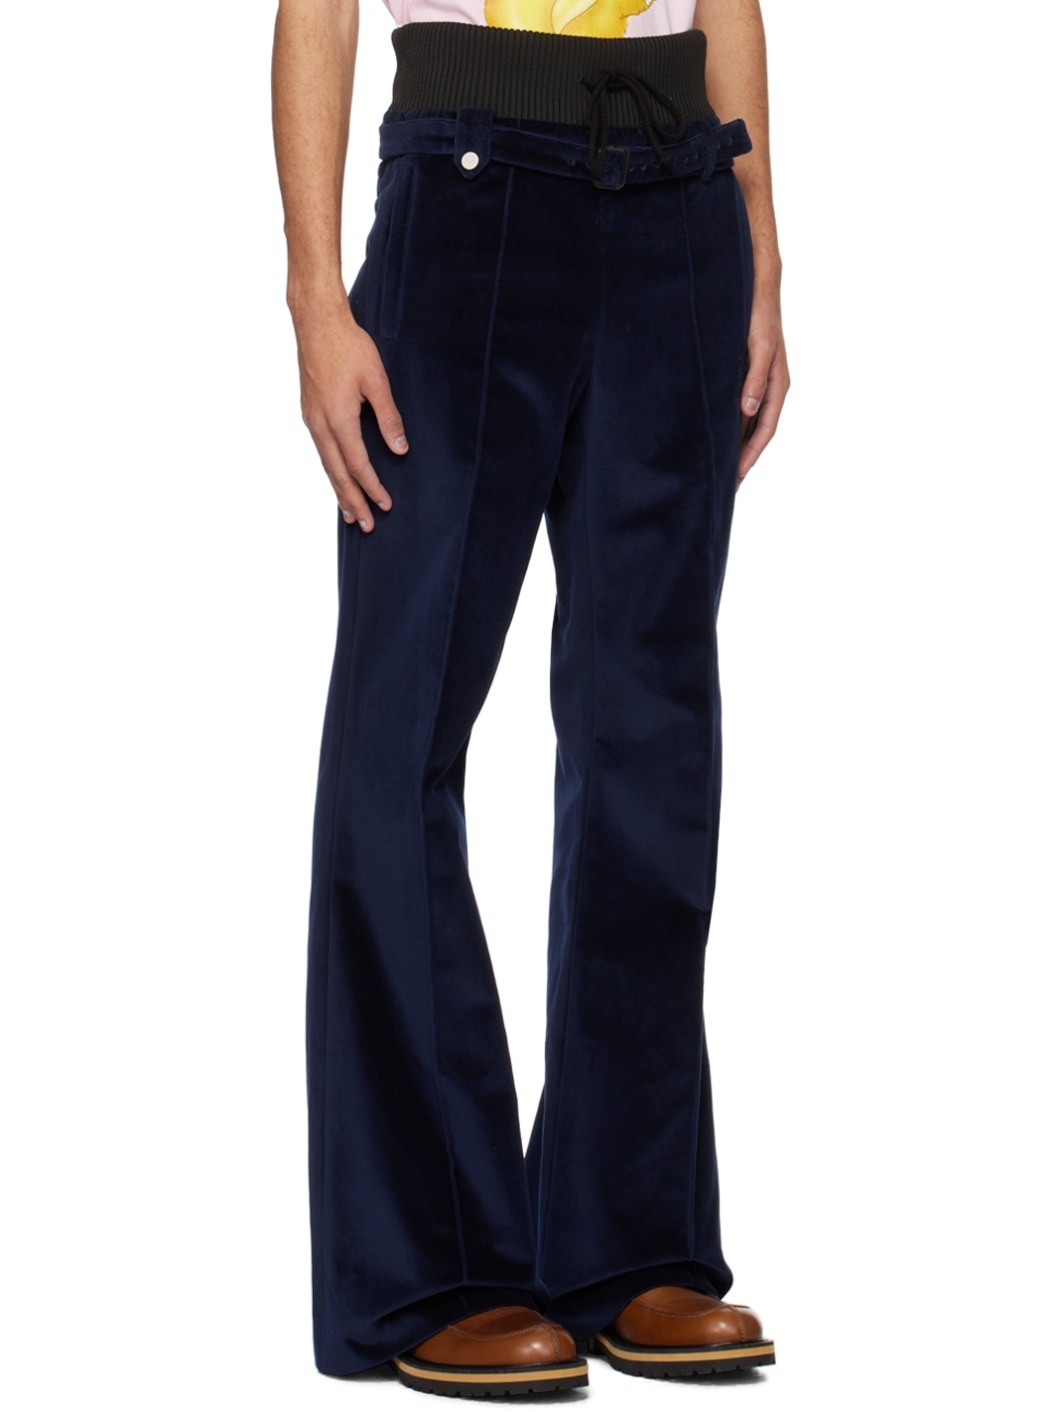 Black & Navy Tailored Track Pants - 2